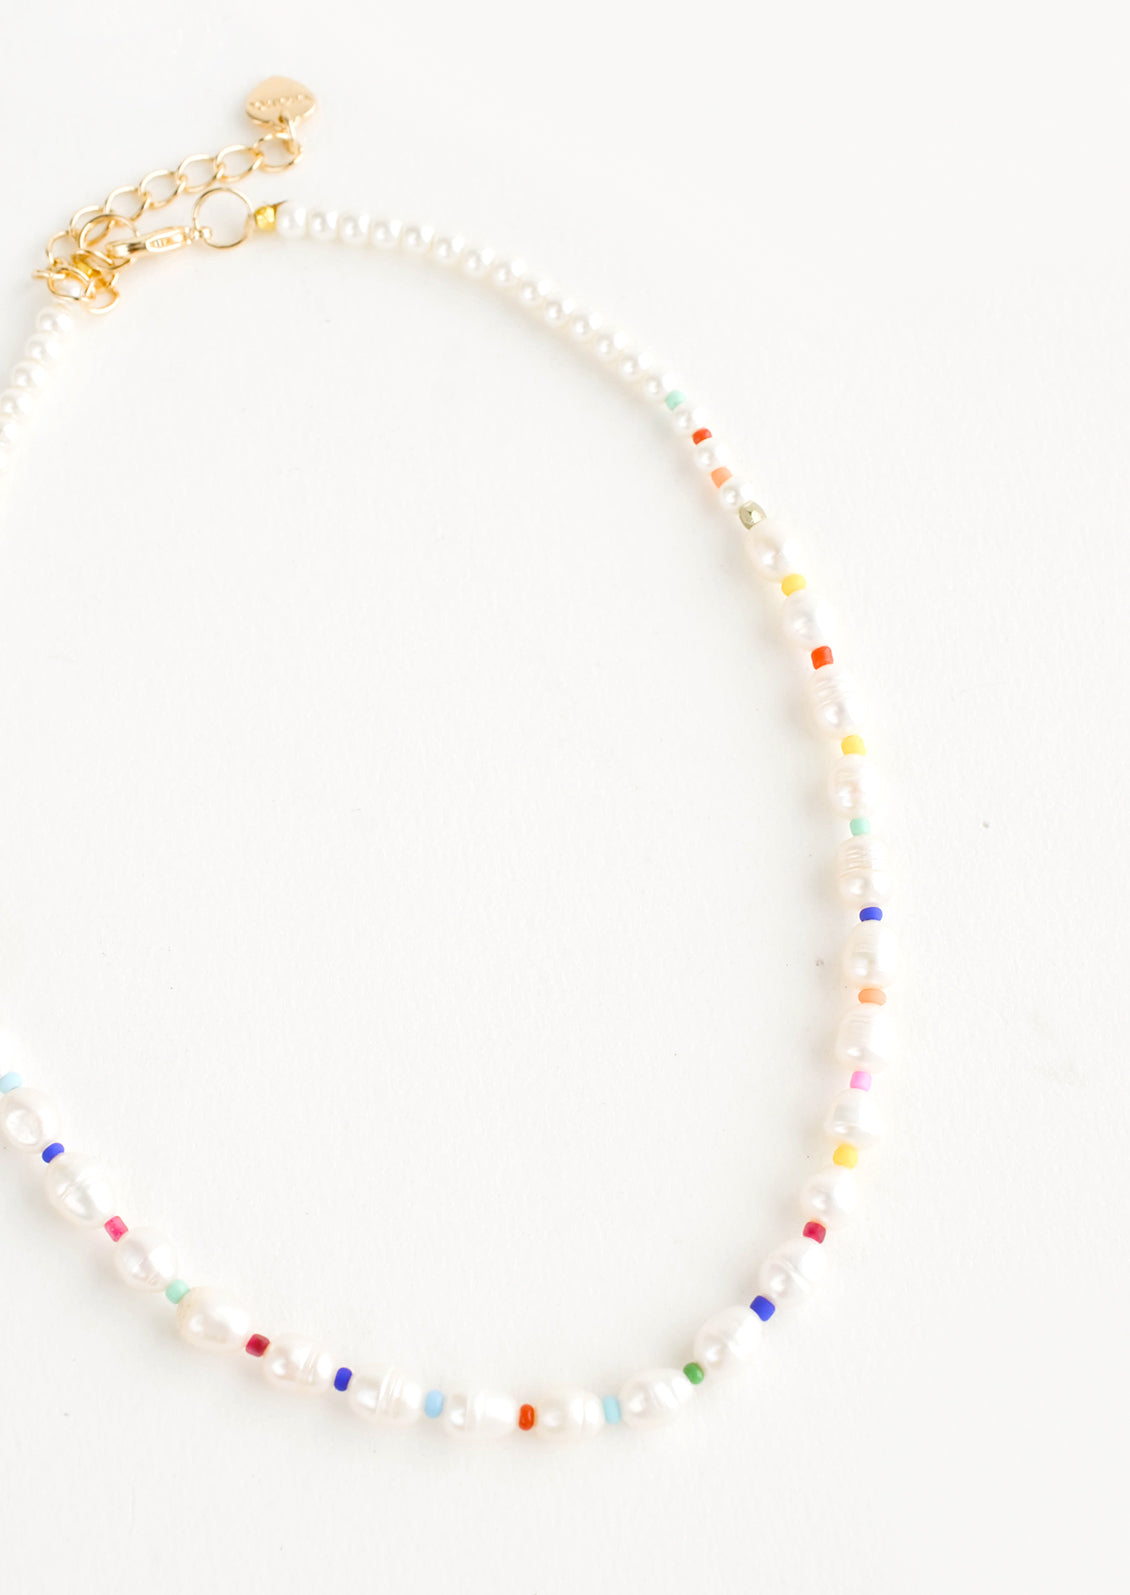 Tiny Seed Bead Necklace | Handmade by Libby & Smee